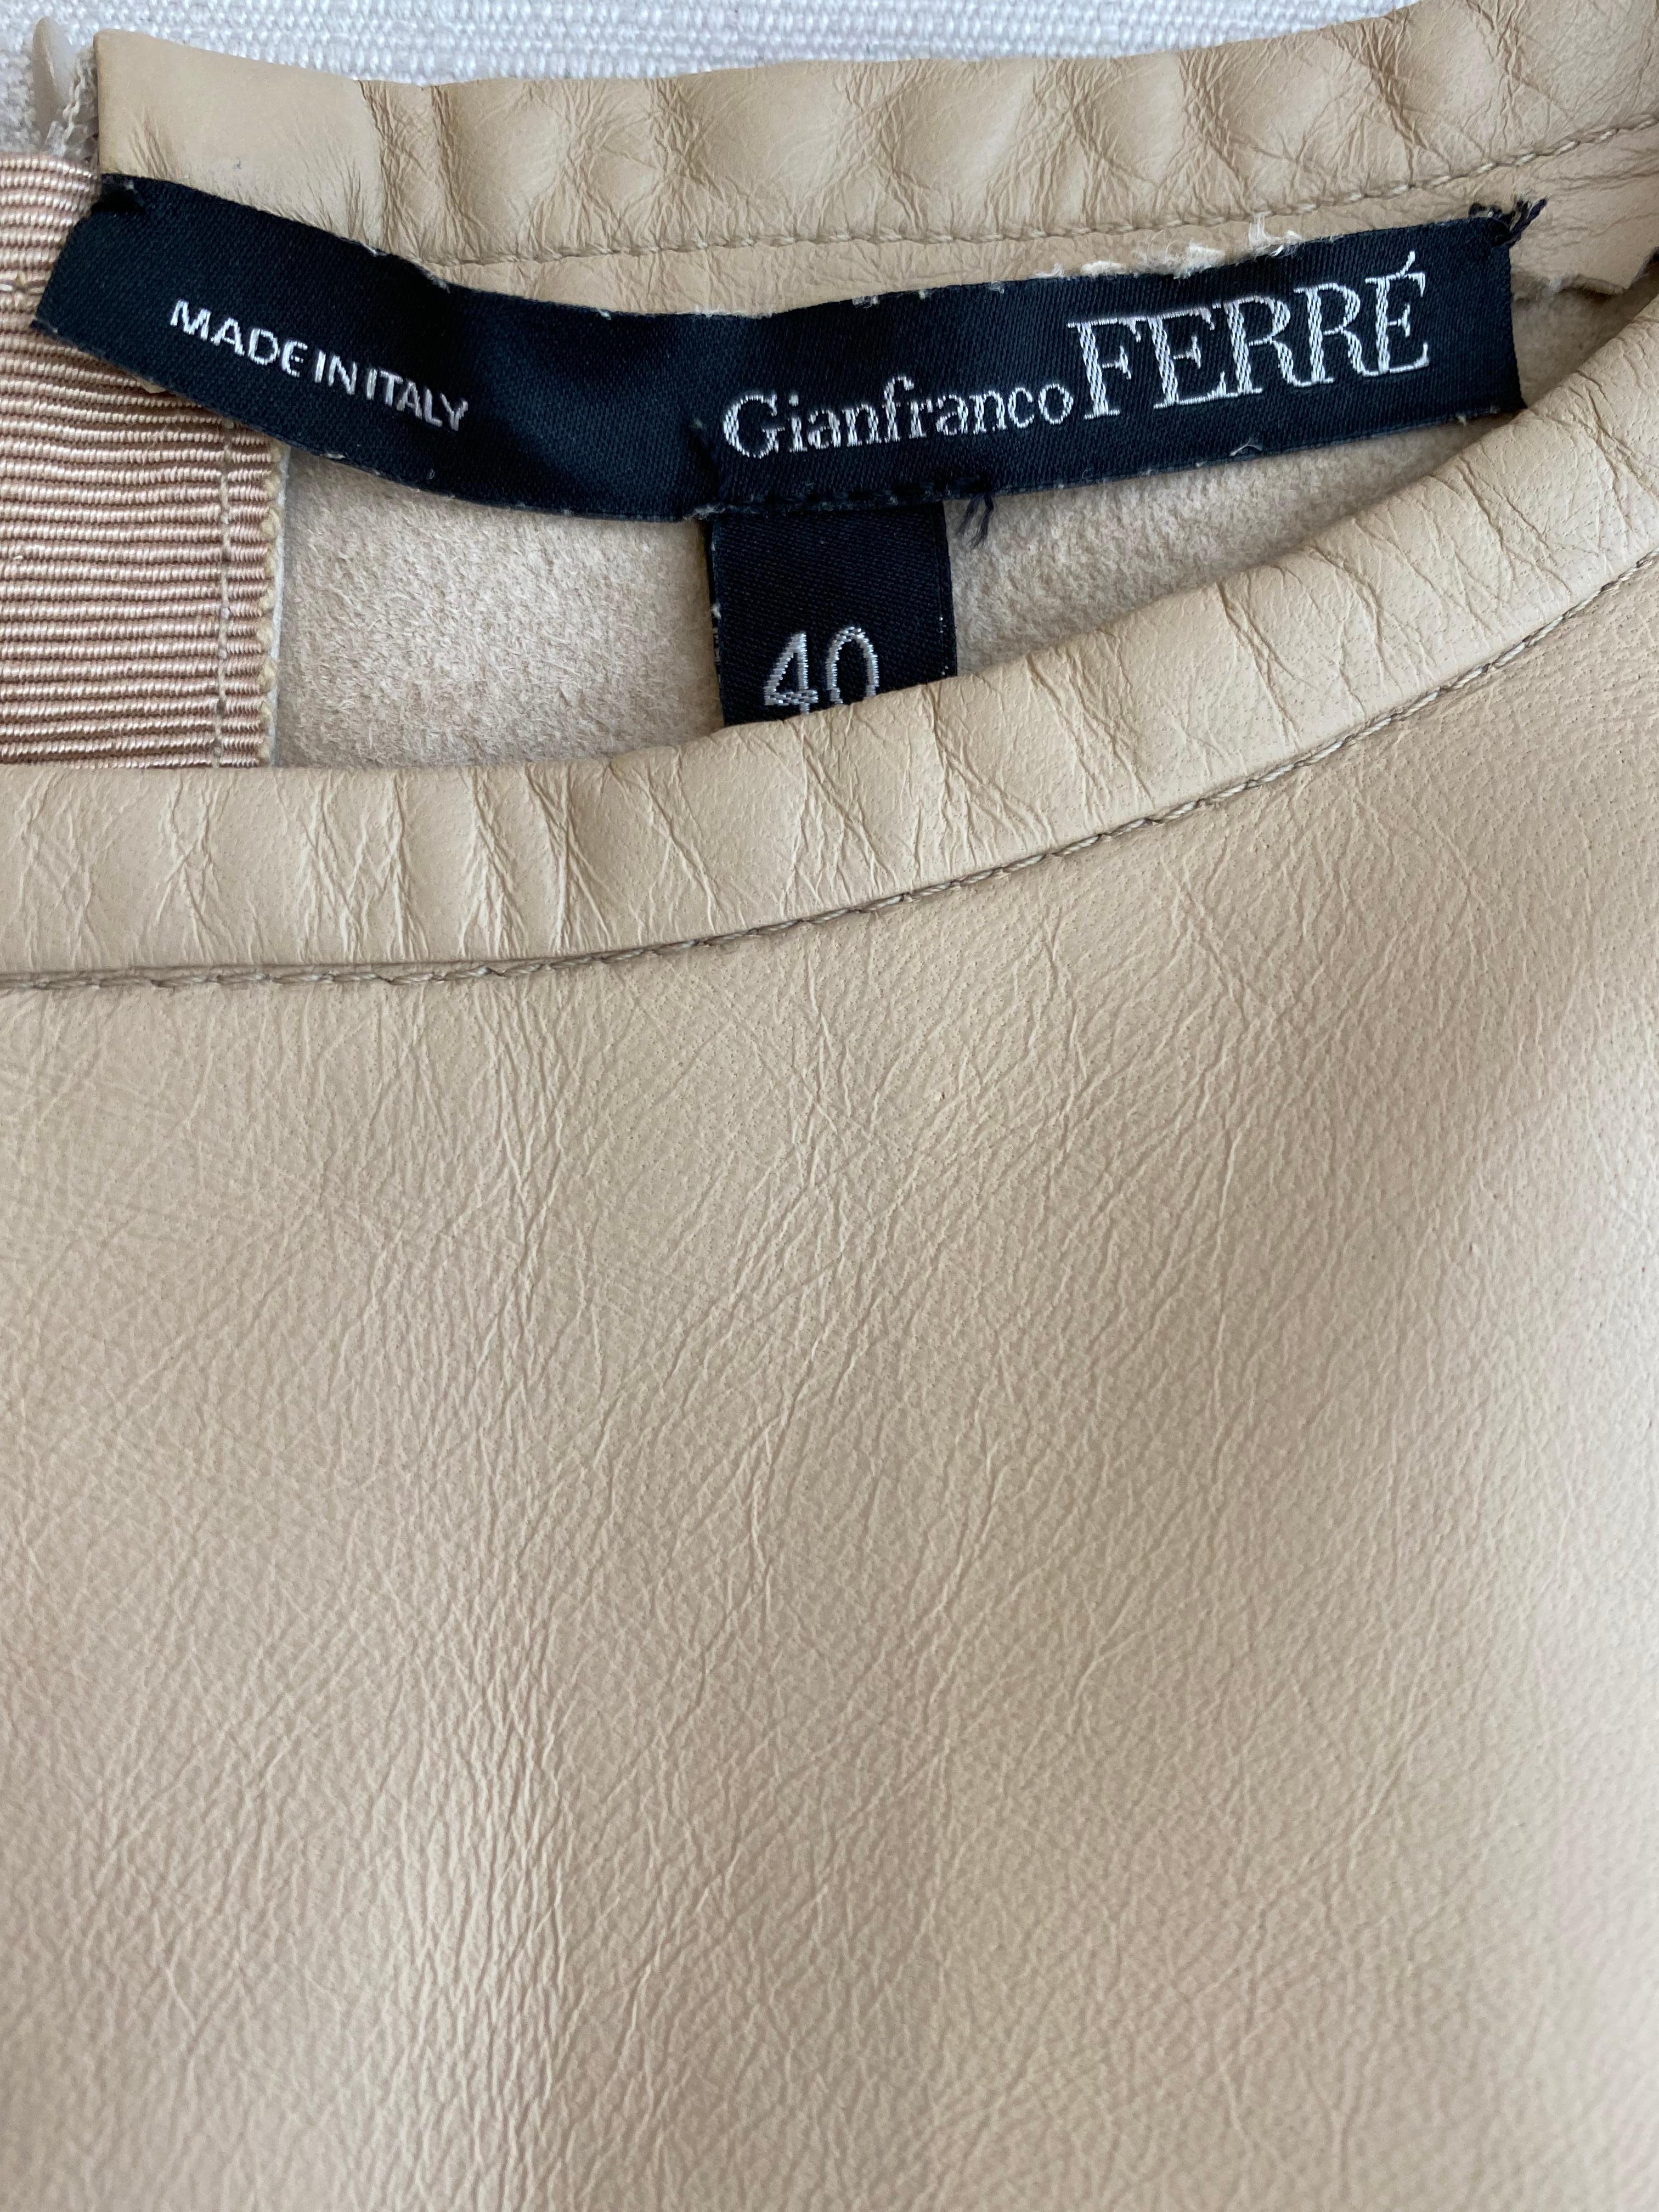 Vintage Gianfranco Ferre Tan Leather and Wool Knit Dress In Good Condition For Sale In Beverly Hills, CA